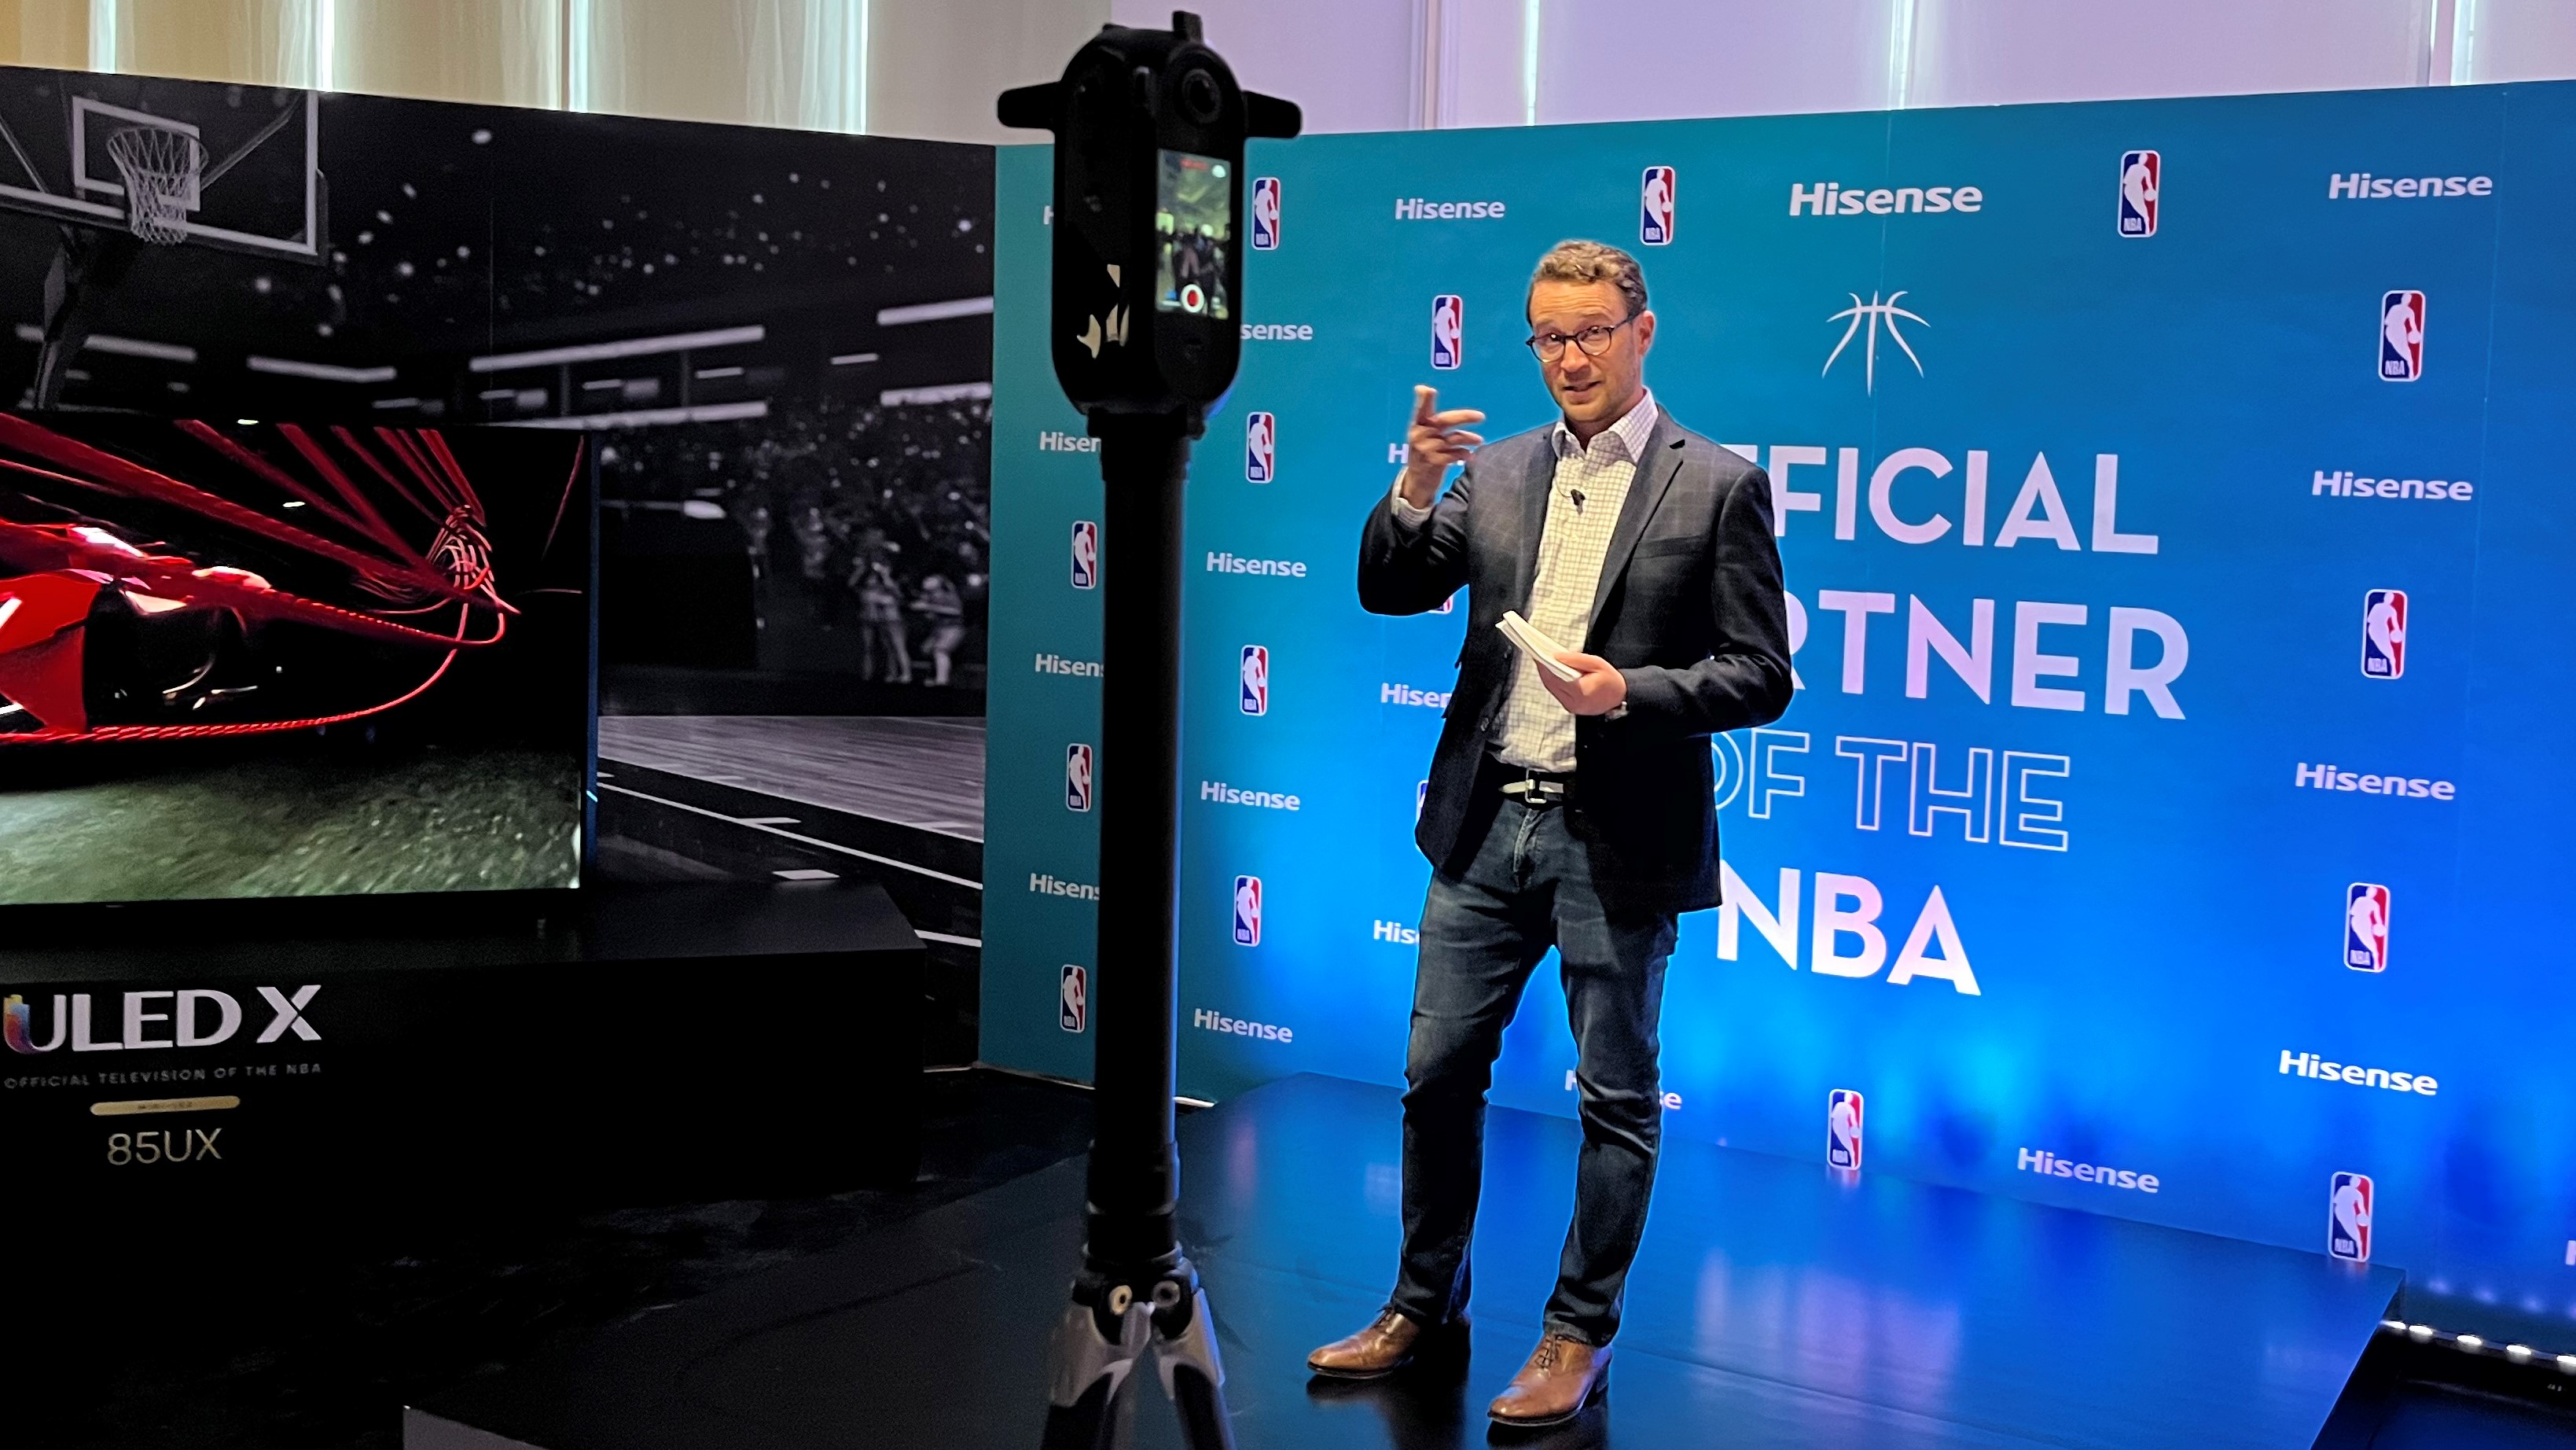 Hisense US CEO David Gold announced the brand's sponsorship of the NBA next to the ULED X TV